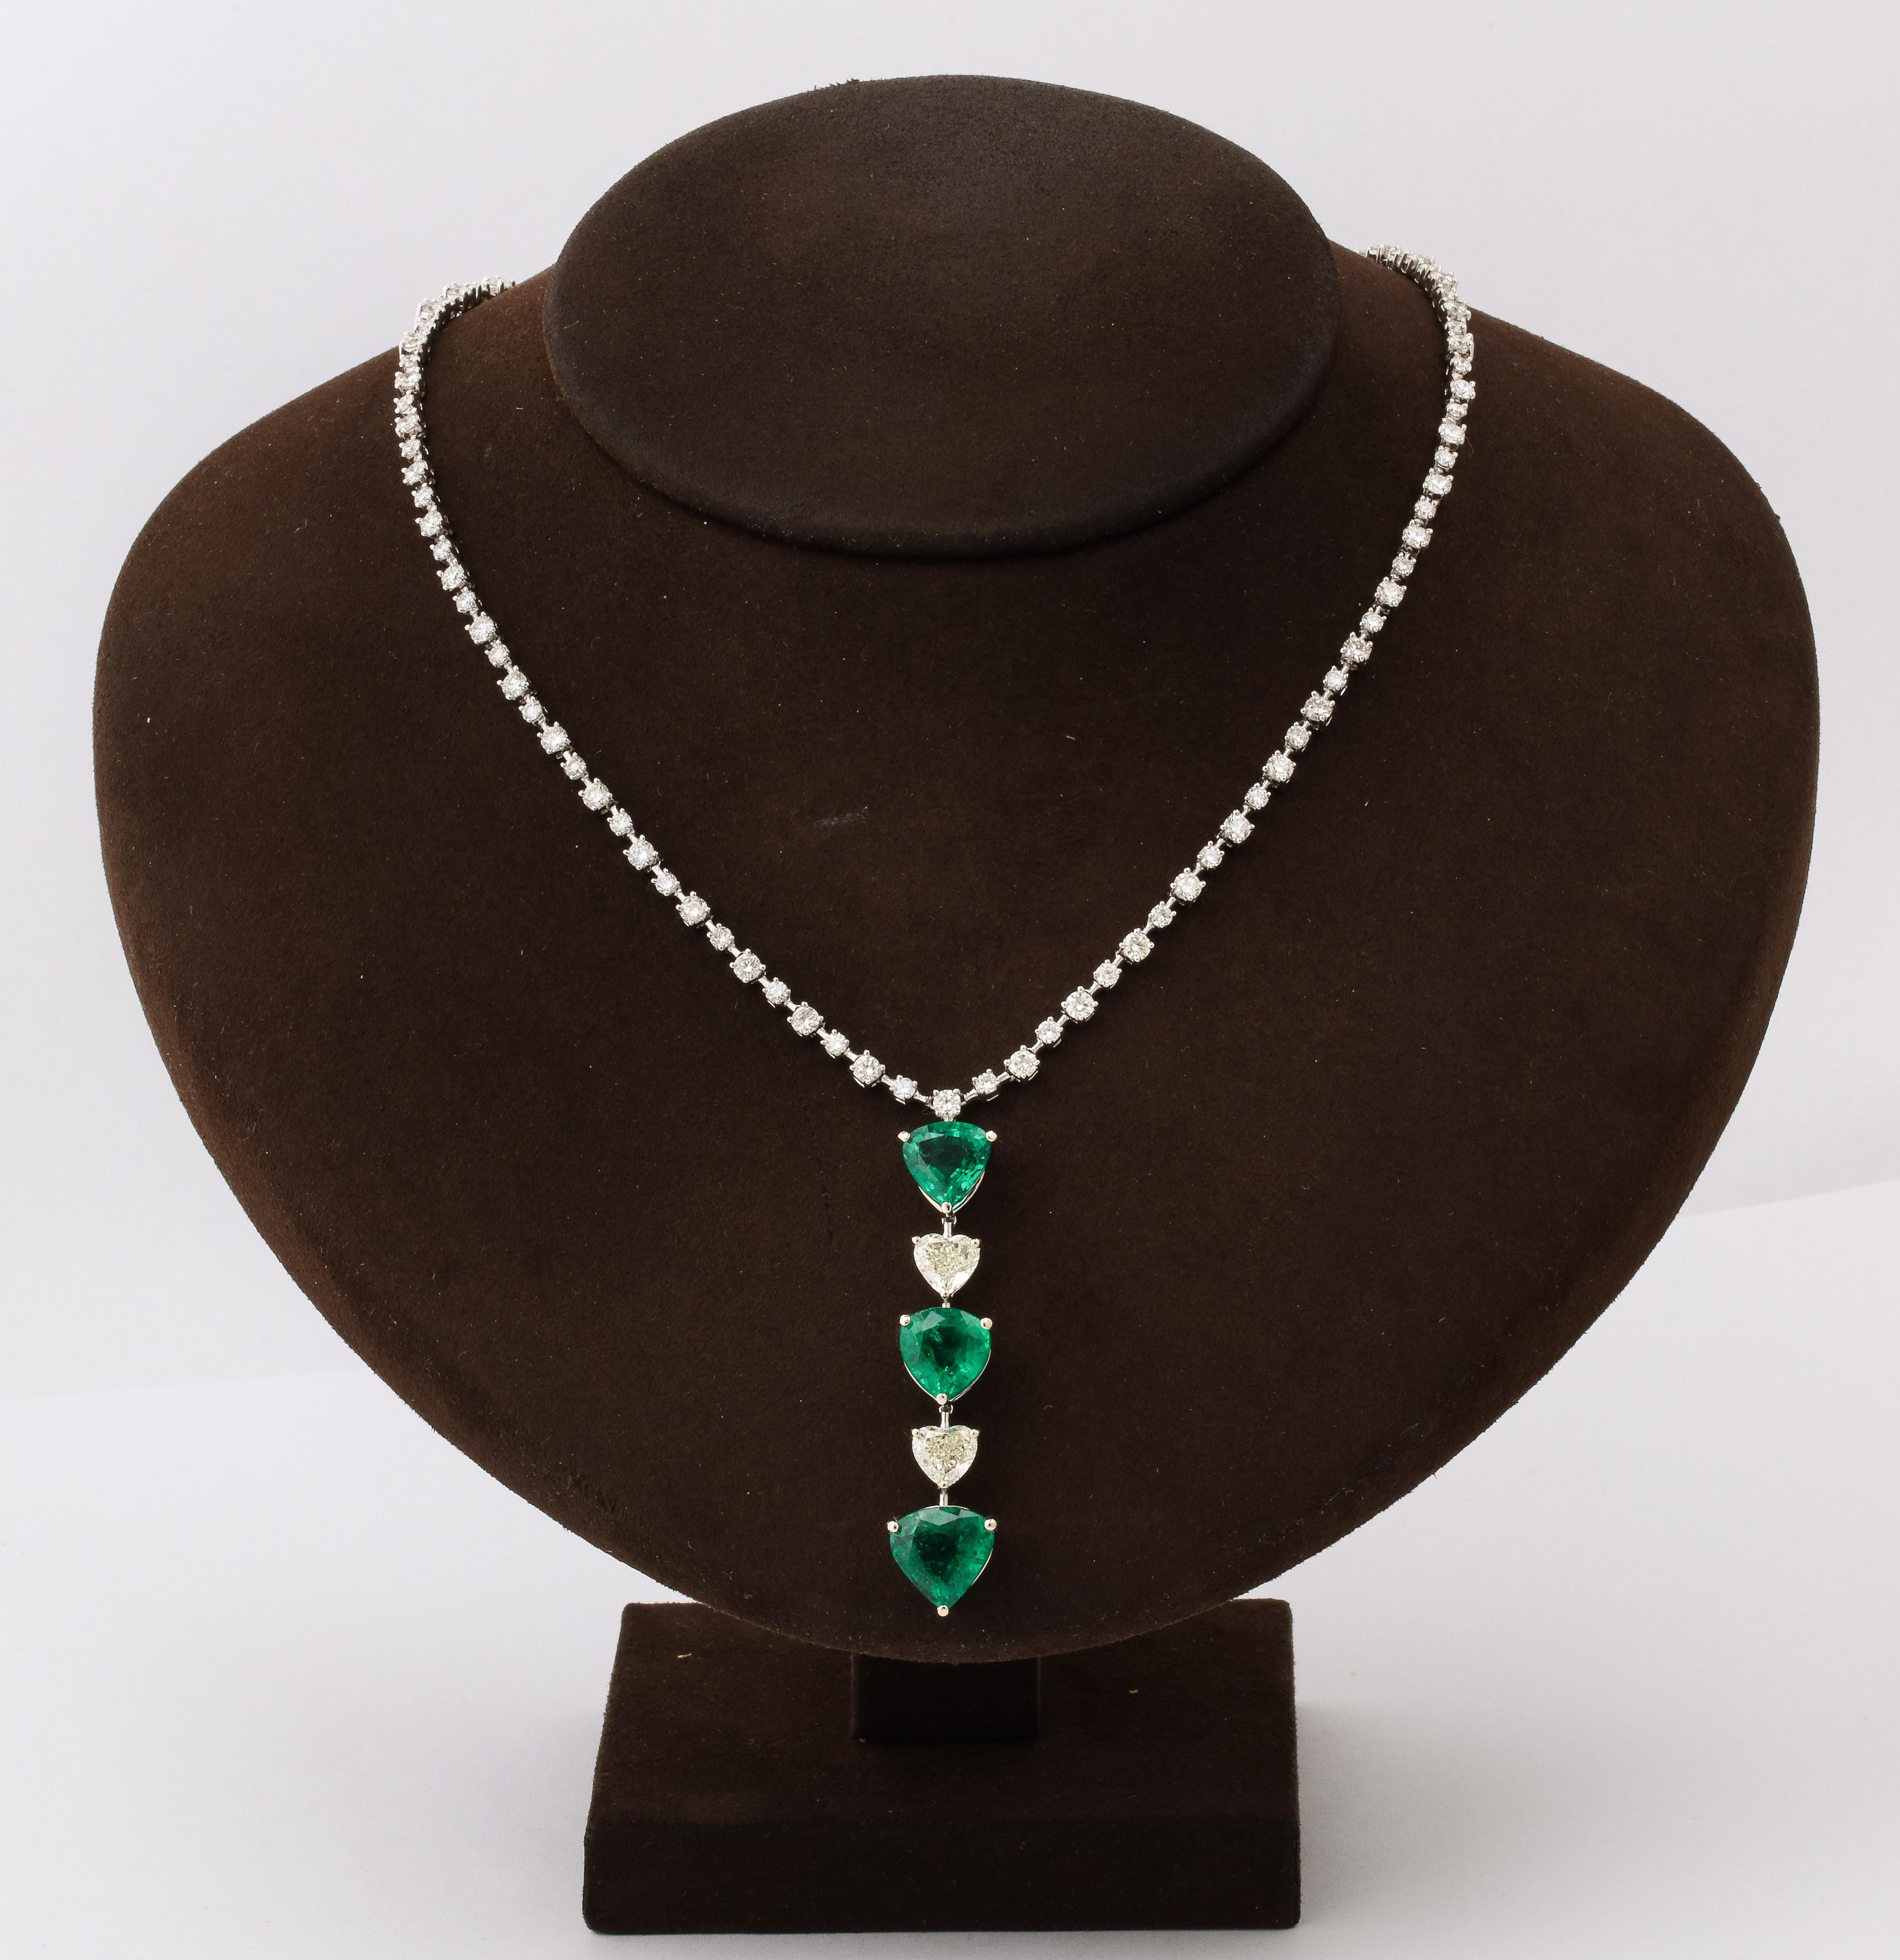 
A unique piece!

Three important VIVID GREEN heart shape Emeralds weighing 9.80 carats.

10.04 carats of round and heart shape white diamonds. 

Set in 18k white gold. 

The center drop featuring the heart shapes is 2.20 inches long. The necklace